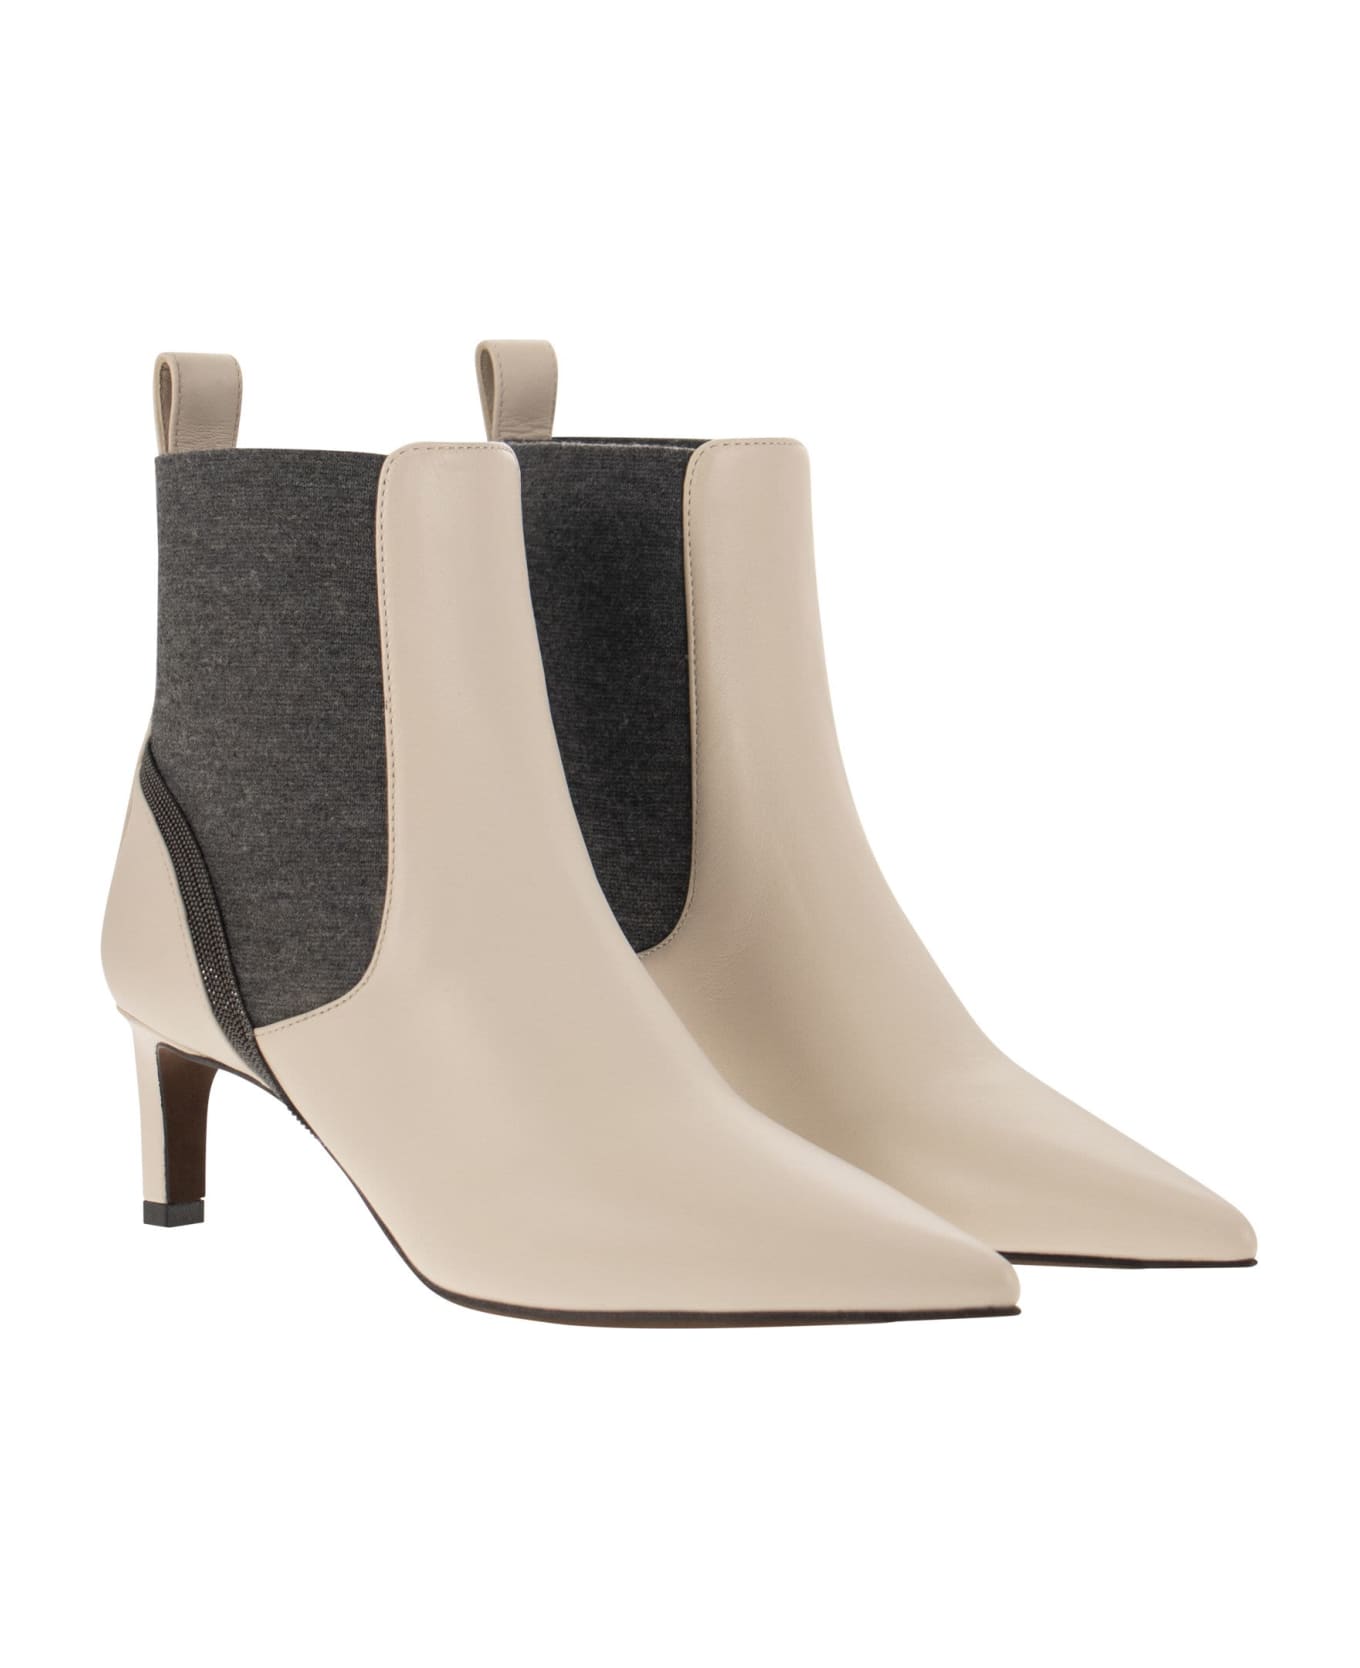 Brunello Cucinelli Leather Heeled Ankle Boots With Shiny Contour - Ivory/grey ブーツ